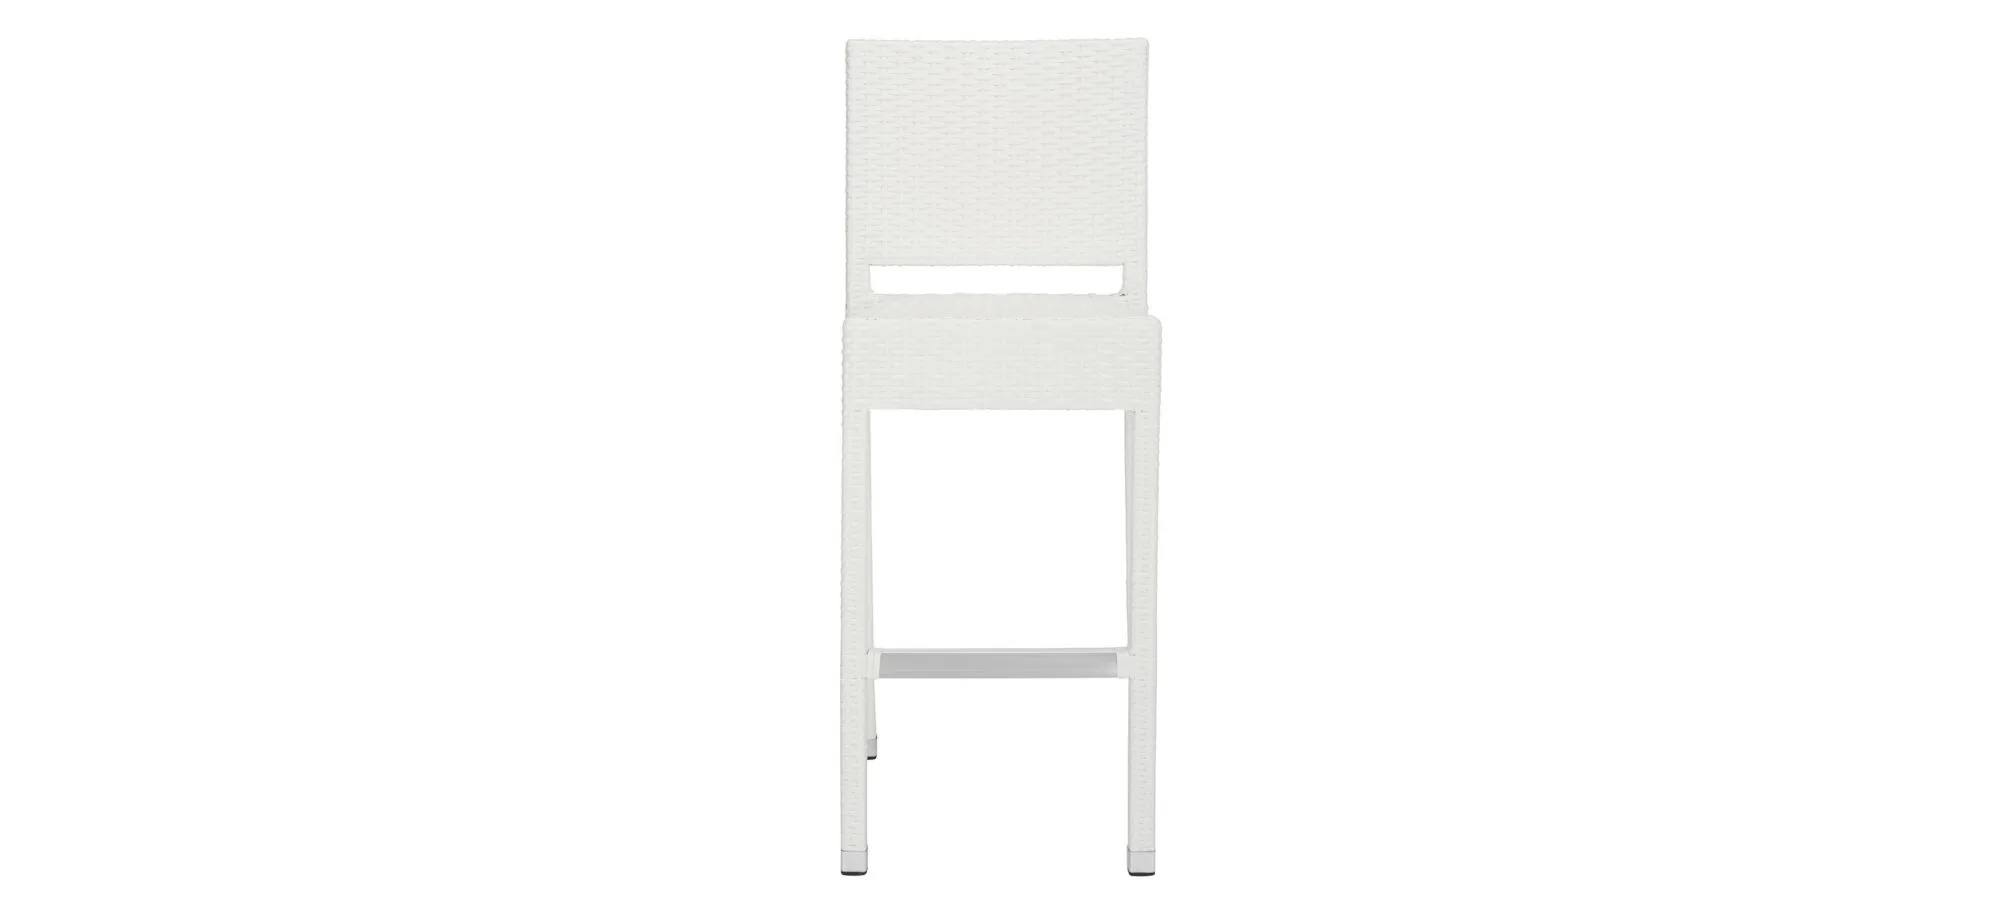 Solano Outdoor Bar Stool in Faye Ash by Safavieh